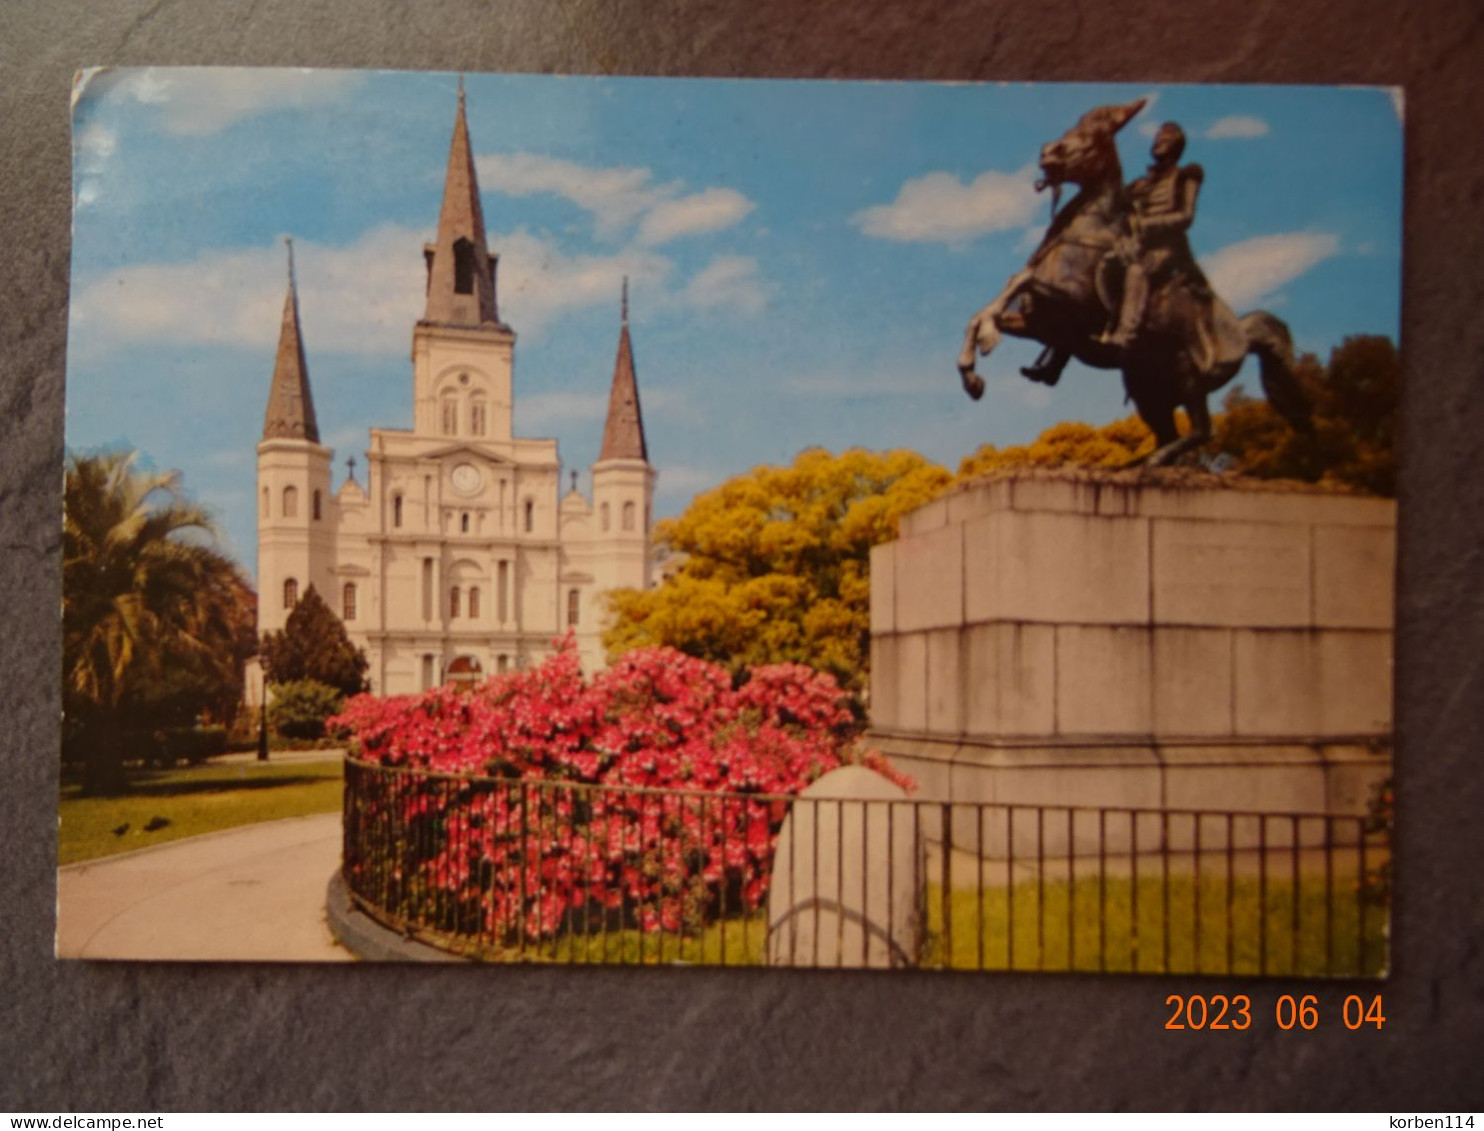 ST. LOUIS CATHEDRAL AND JACKSON MONUMENT - St Louis – Missouri